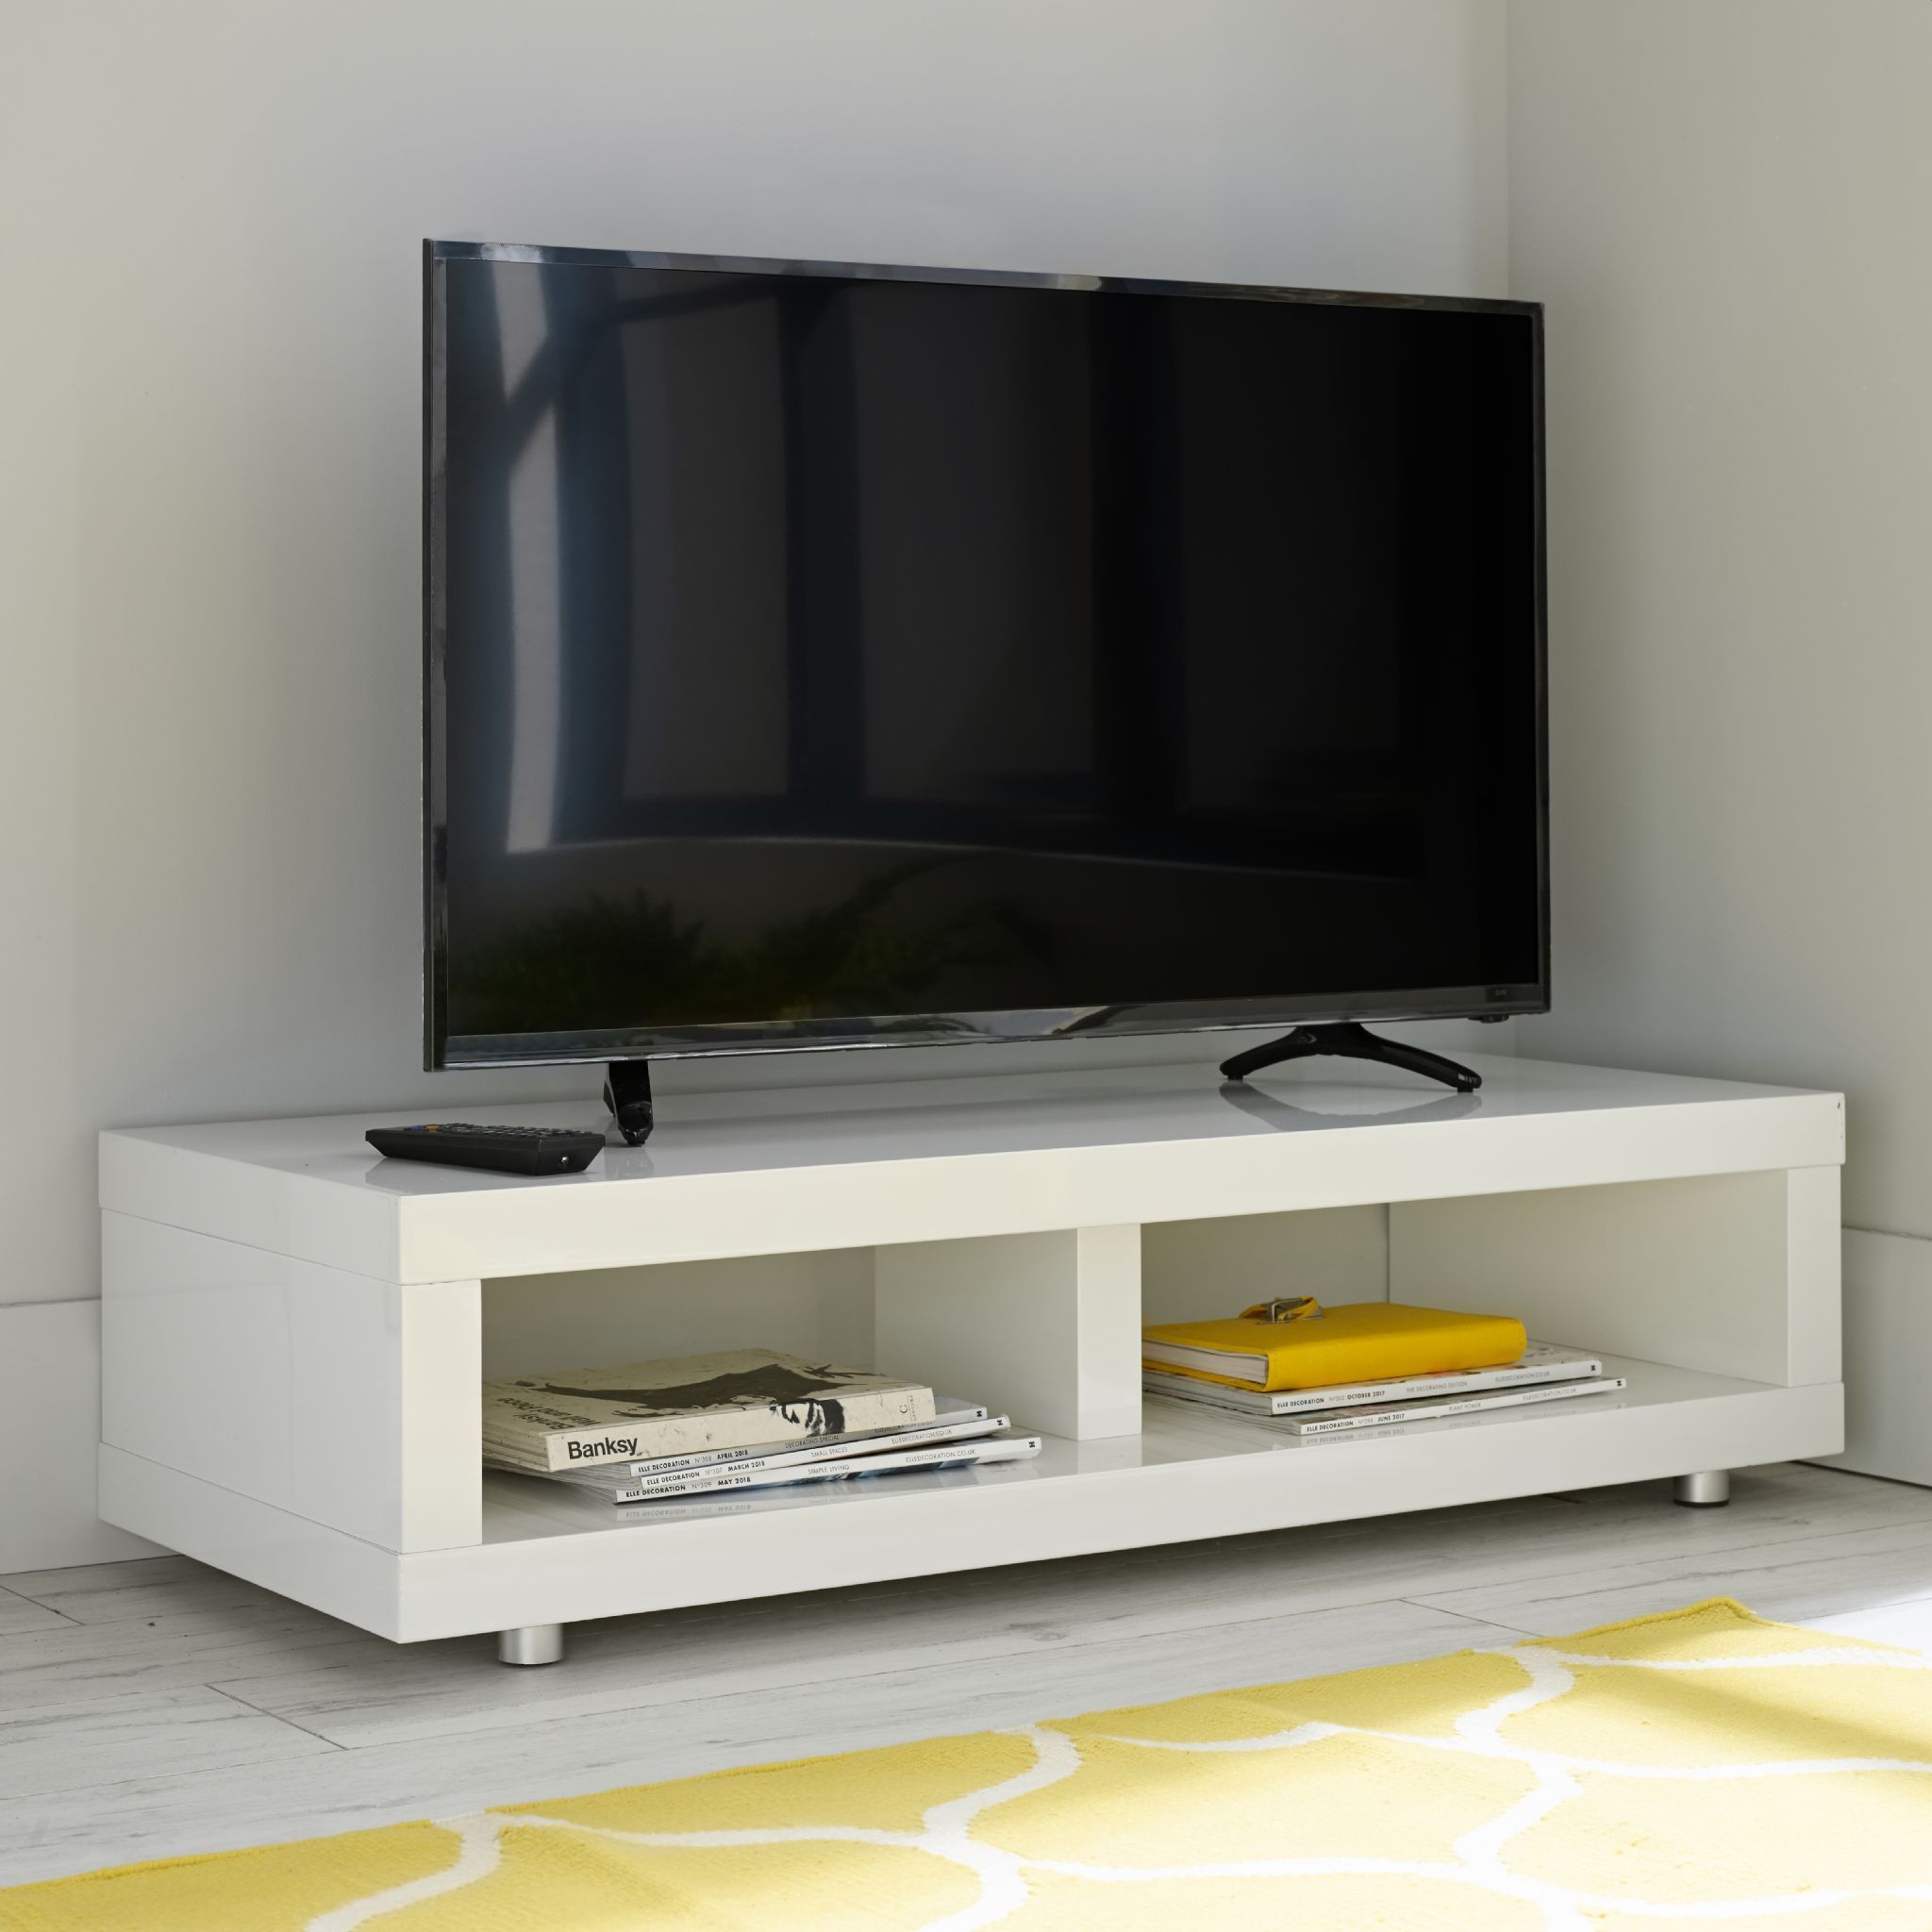 High Gloss Contemporary White Tv Television Stand Unit Cabinet Pertaining To Modern Contemporary Tv Stands (View 4 of 15)